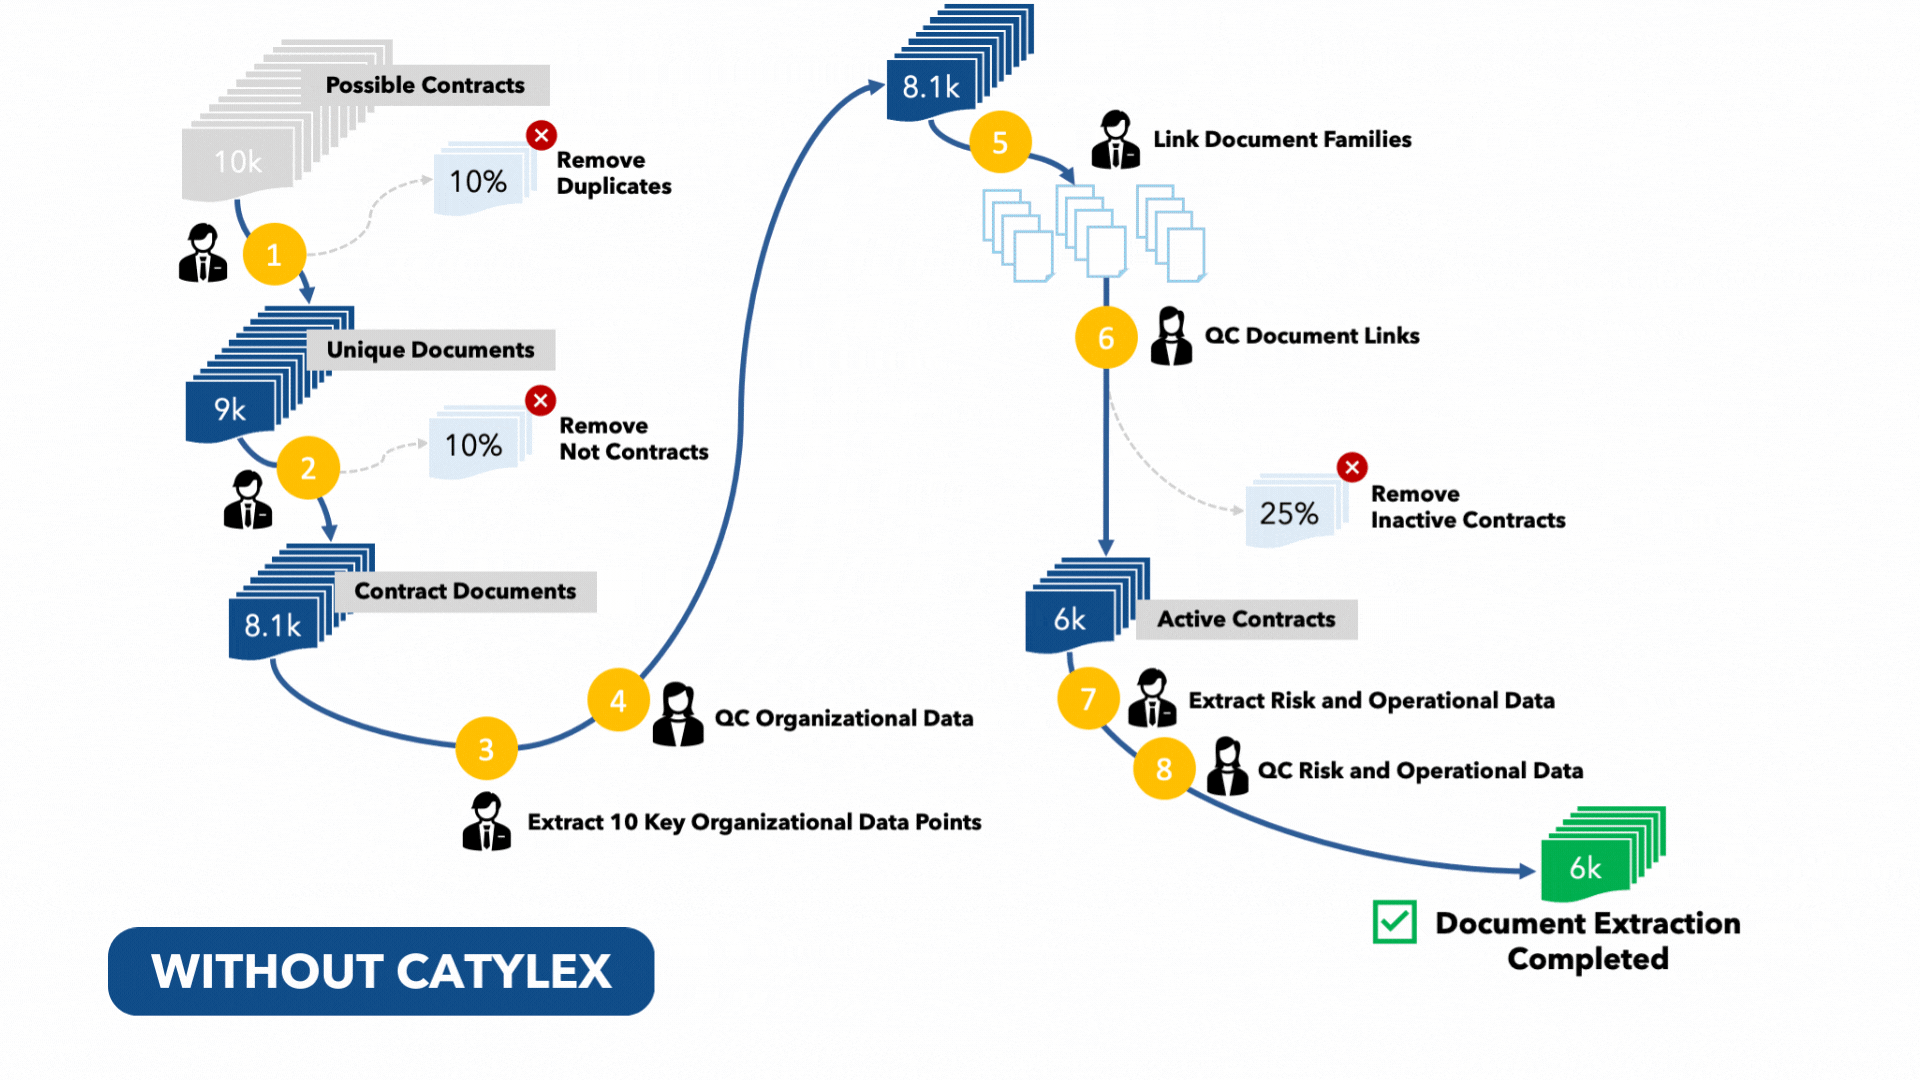 Contract Data Extraction With Catylex vs. Without Catylex